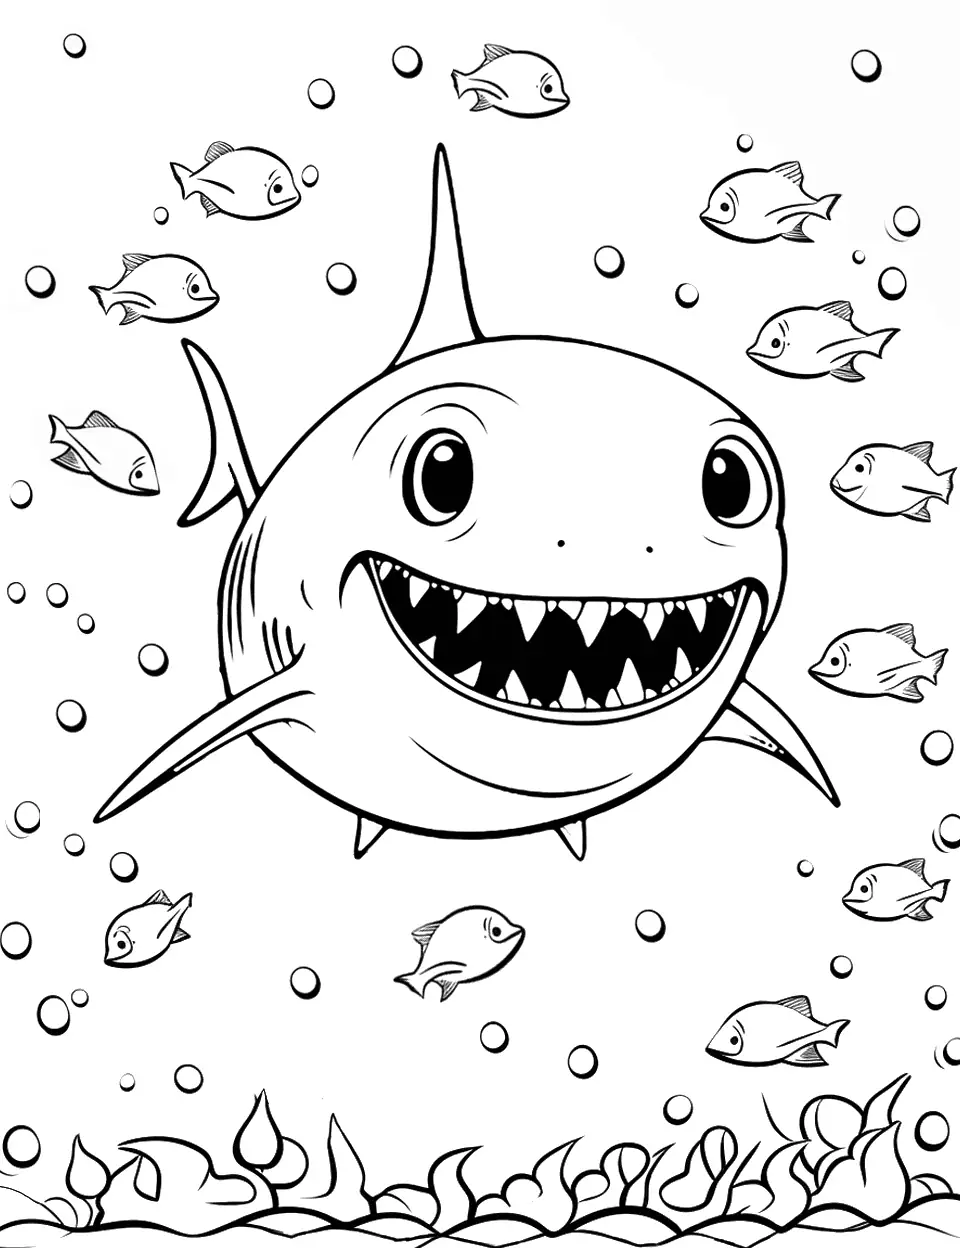 Cute Baby Shark Coloring Page - A cute smiling Baby Shark with big, friendly eyes, surrounded by small fishes.